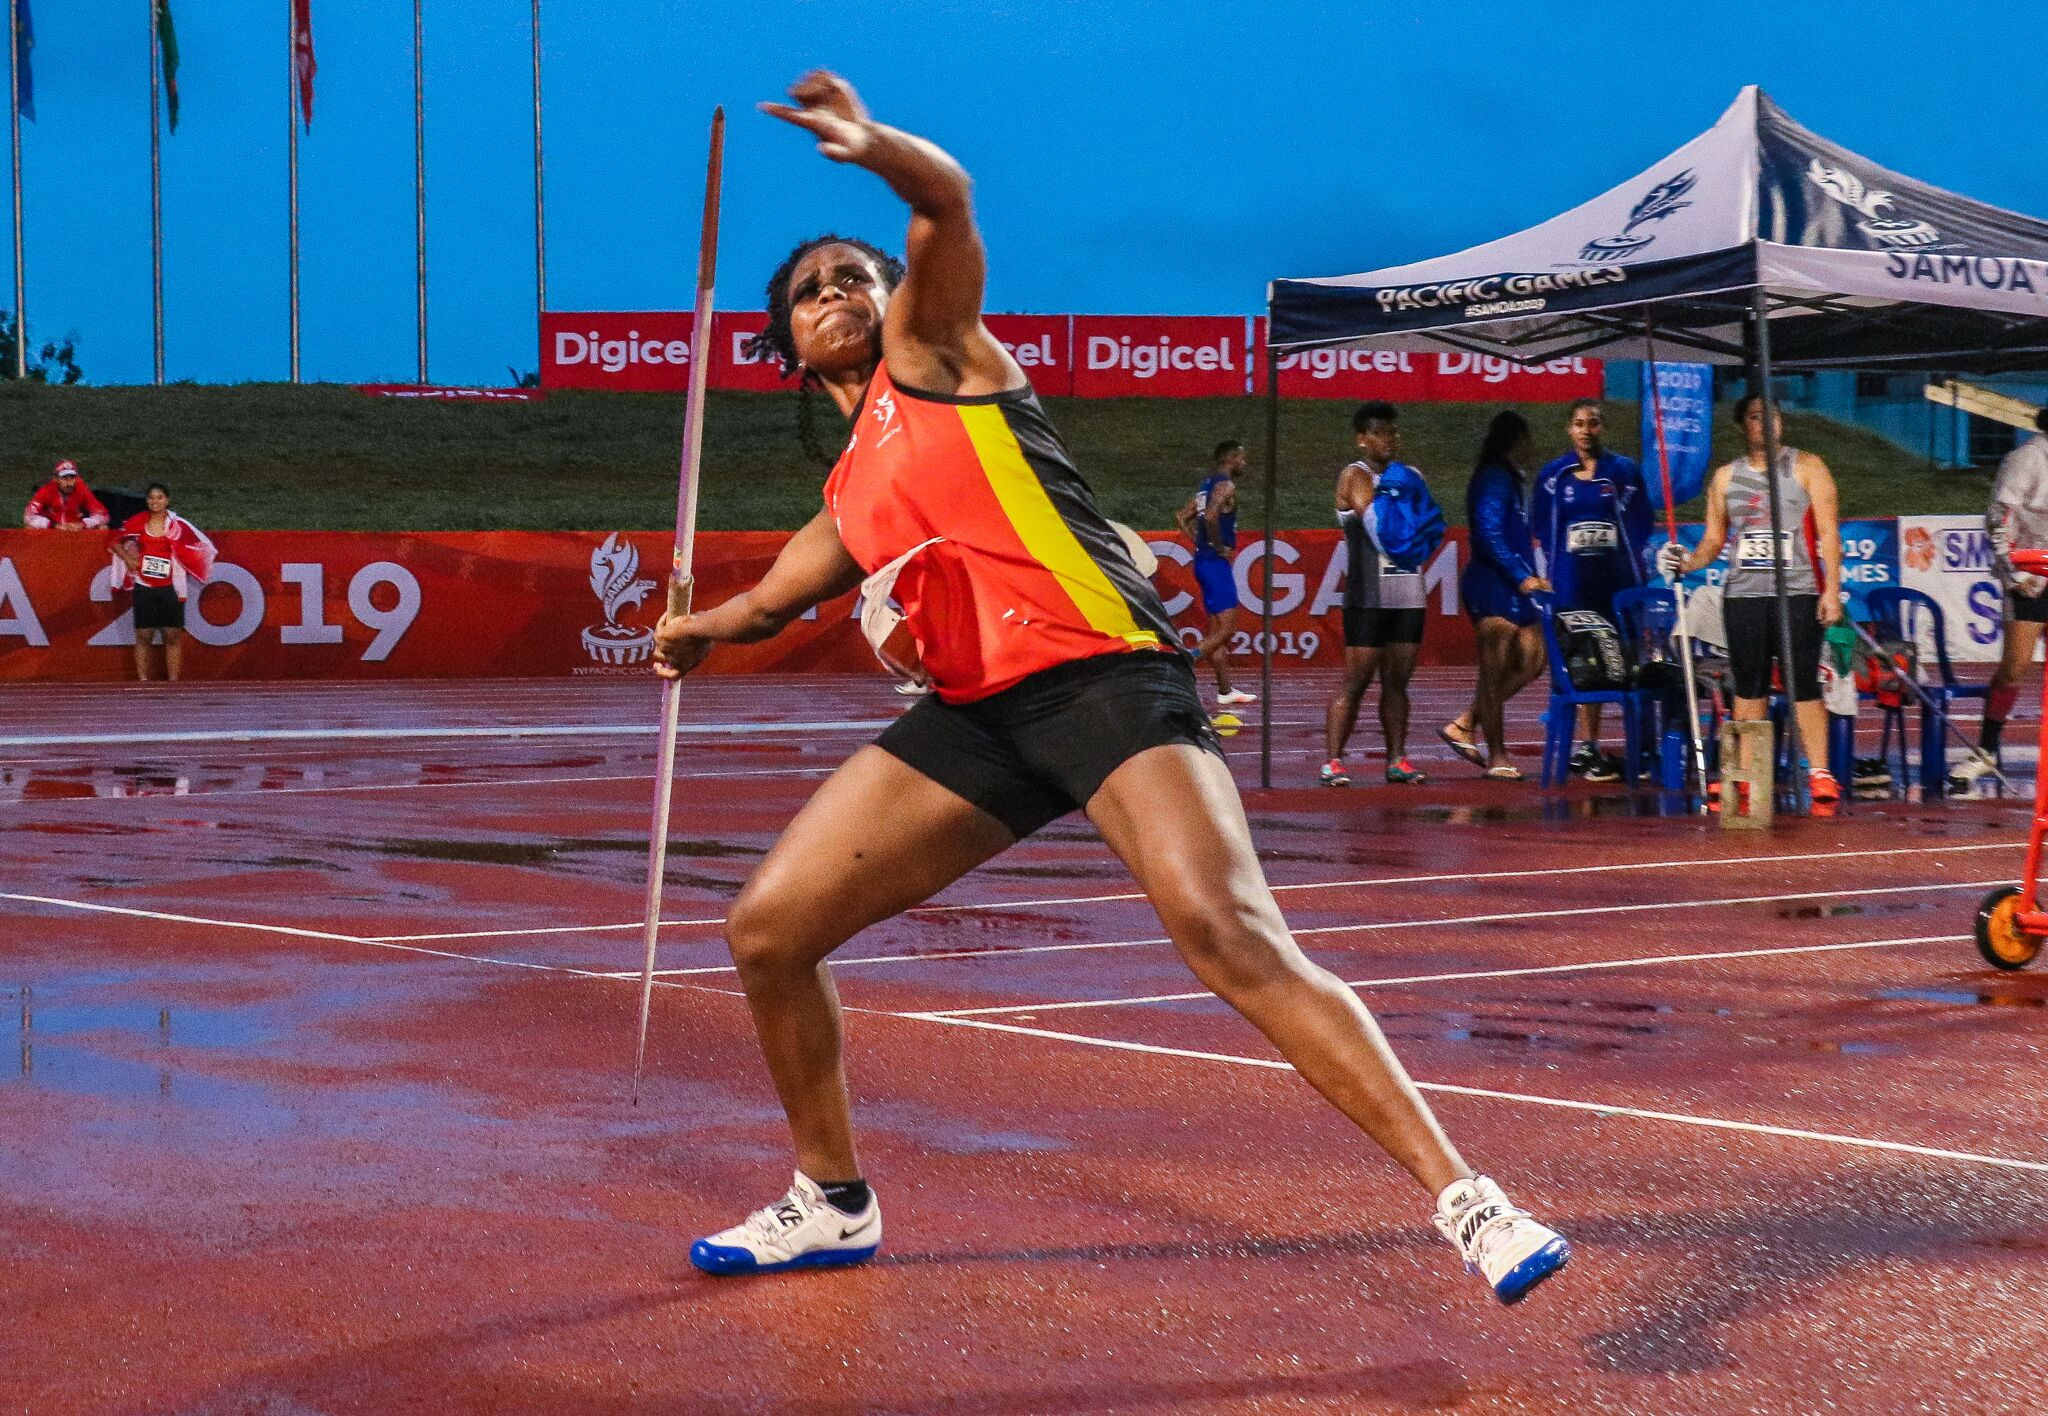 Sharon Toako took gold in a dramatic women’s javelin competition that had to be paused due to heavy rain ©Samoa 2019